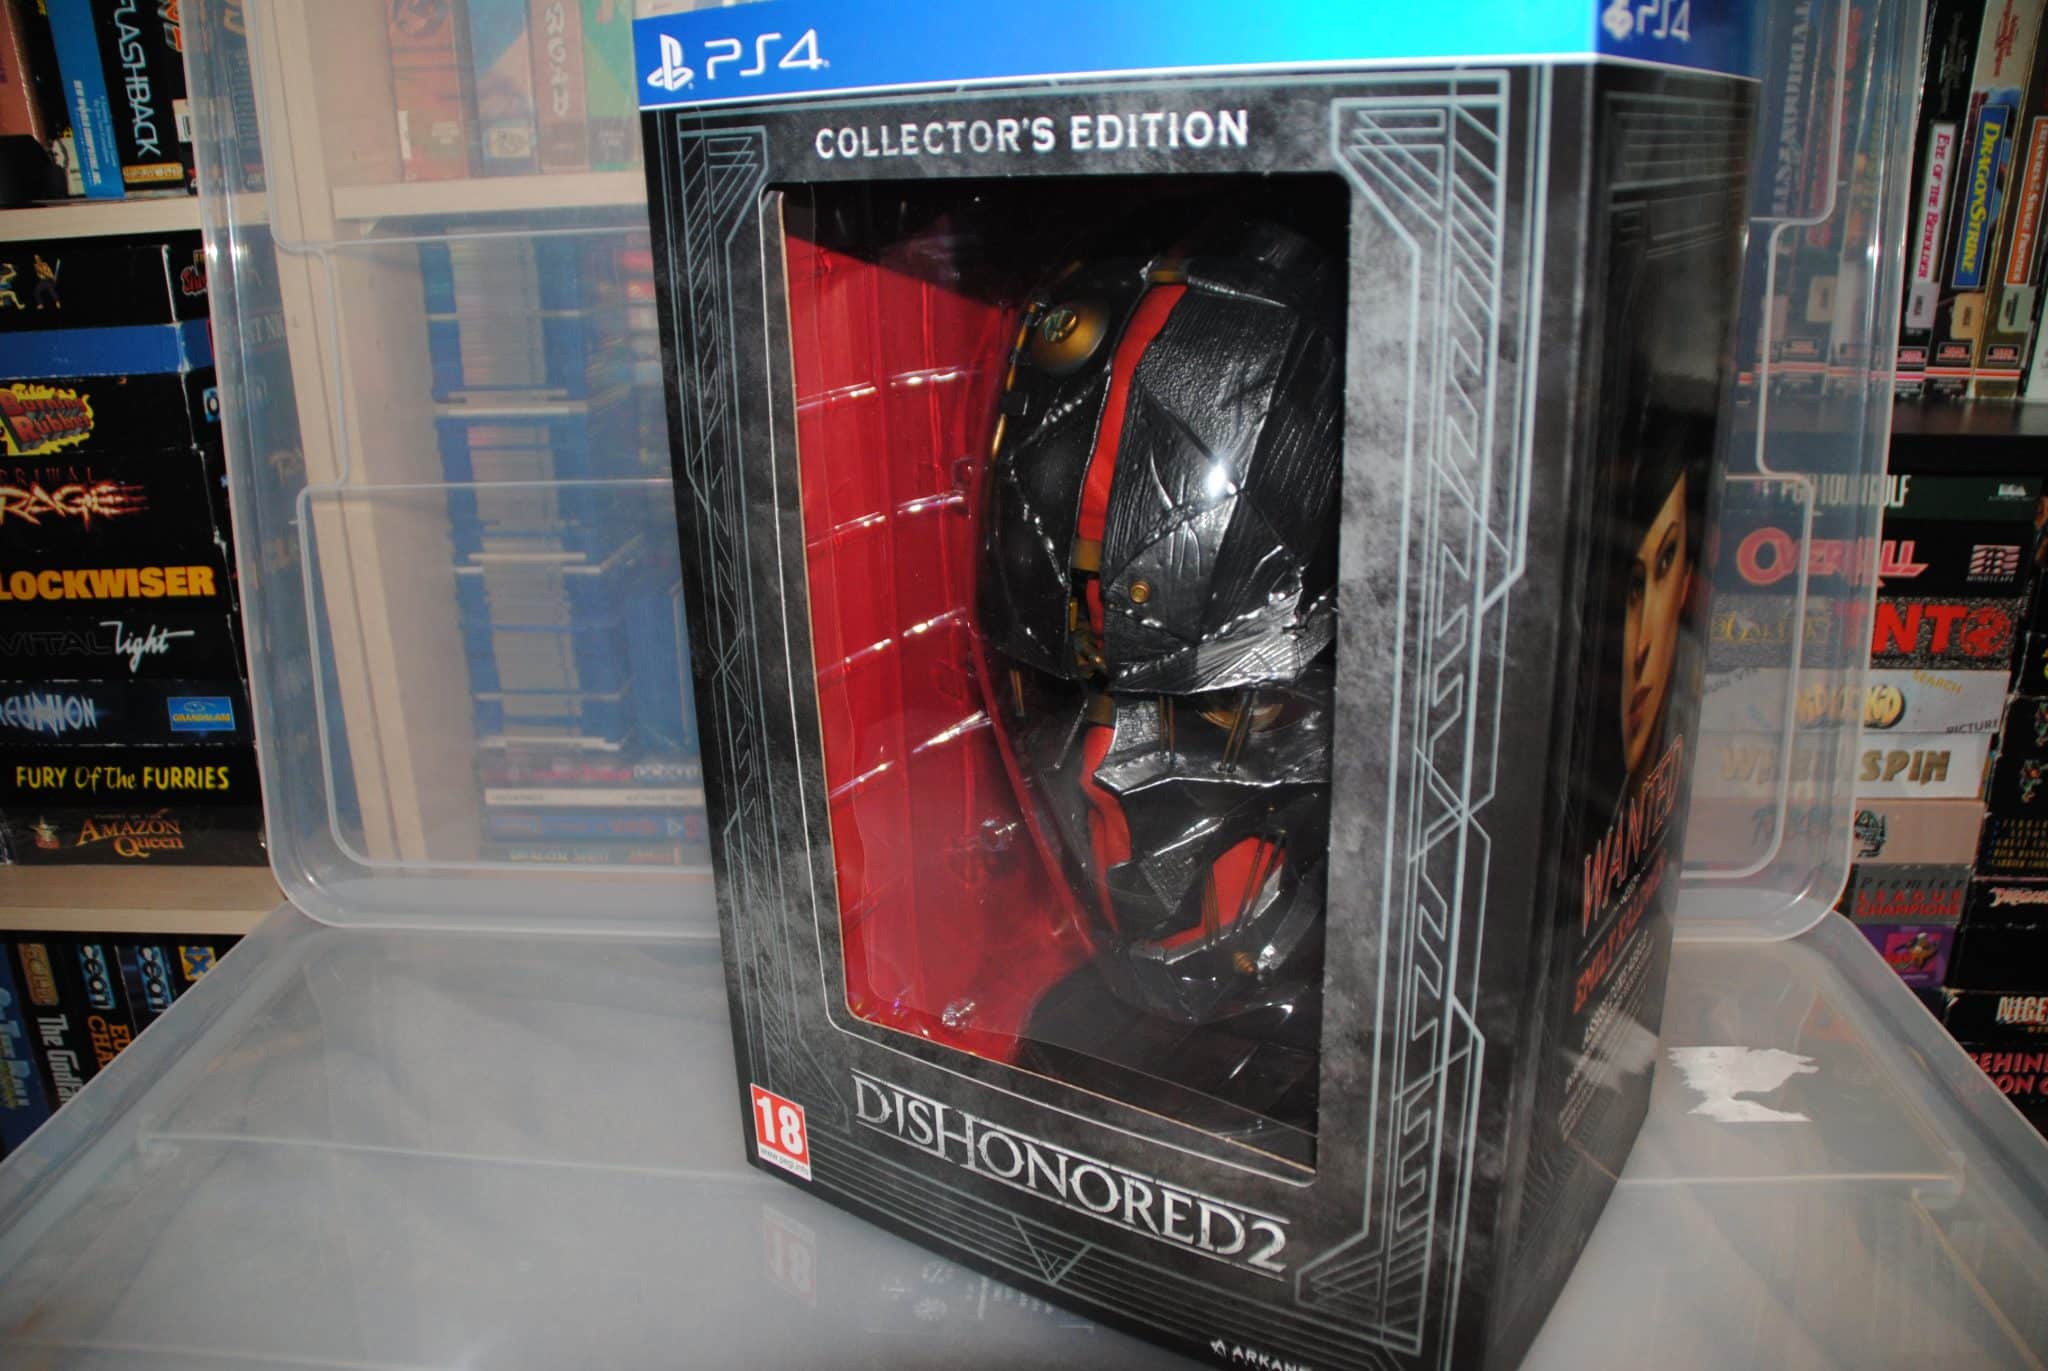 A Look At DISHONORED 2 COLLECTOR'S EDITION • AmigaGuru's GamerBlog